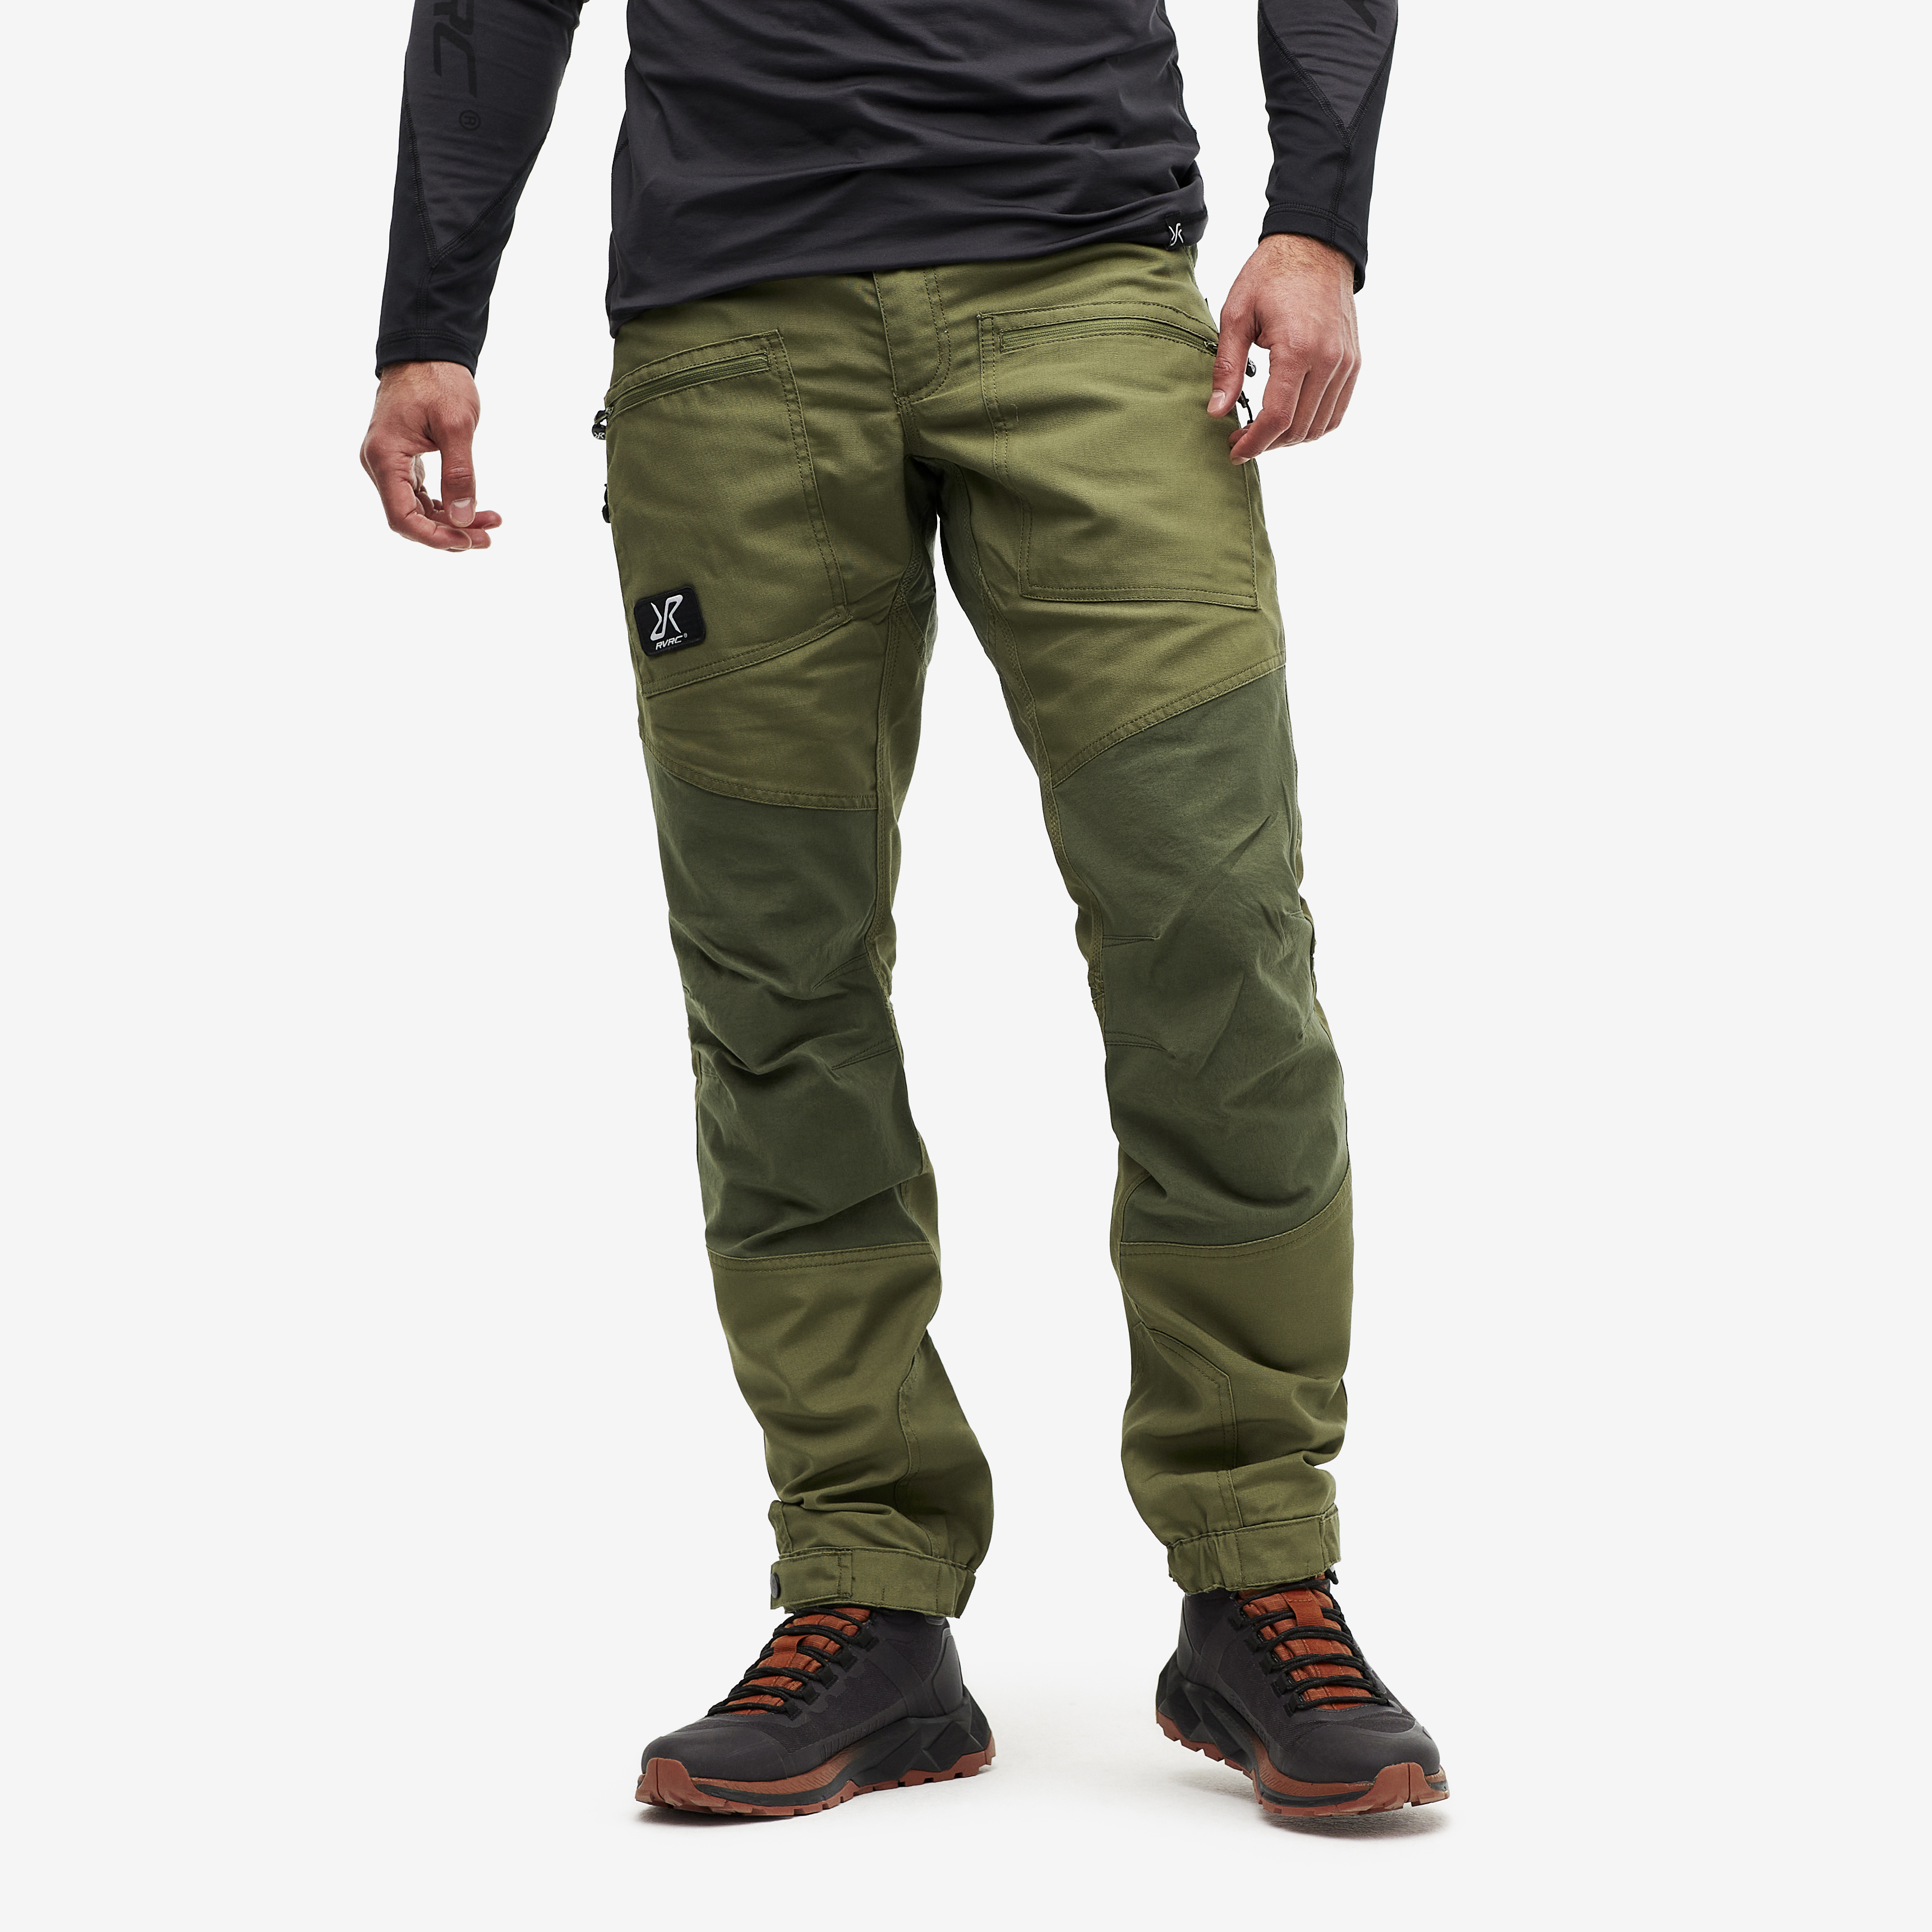 Nordwand Pro Pants Burnt Olive Heren